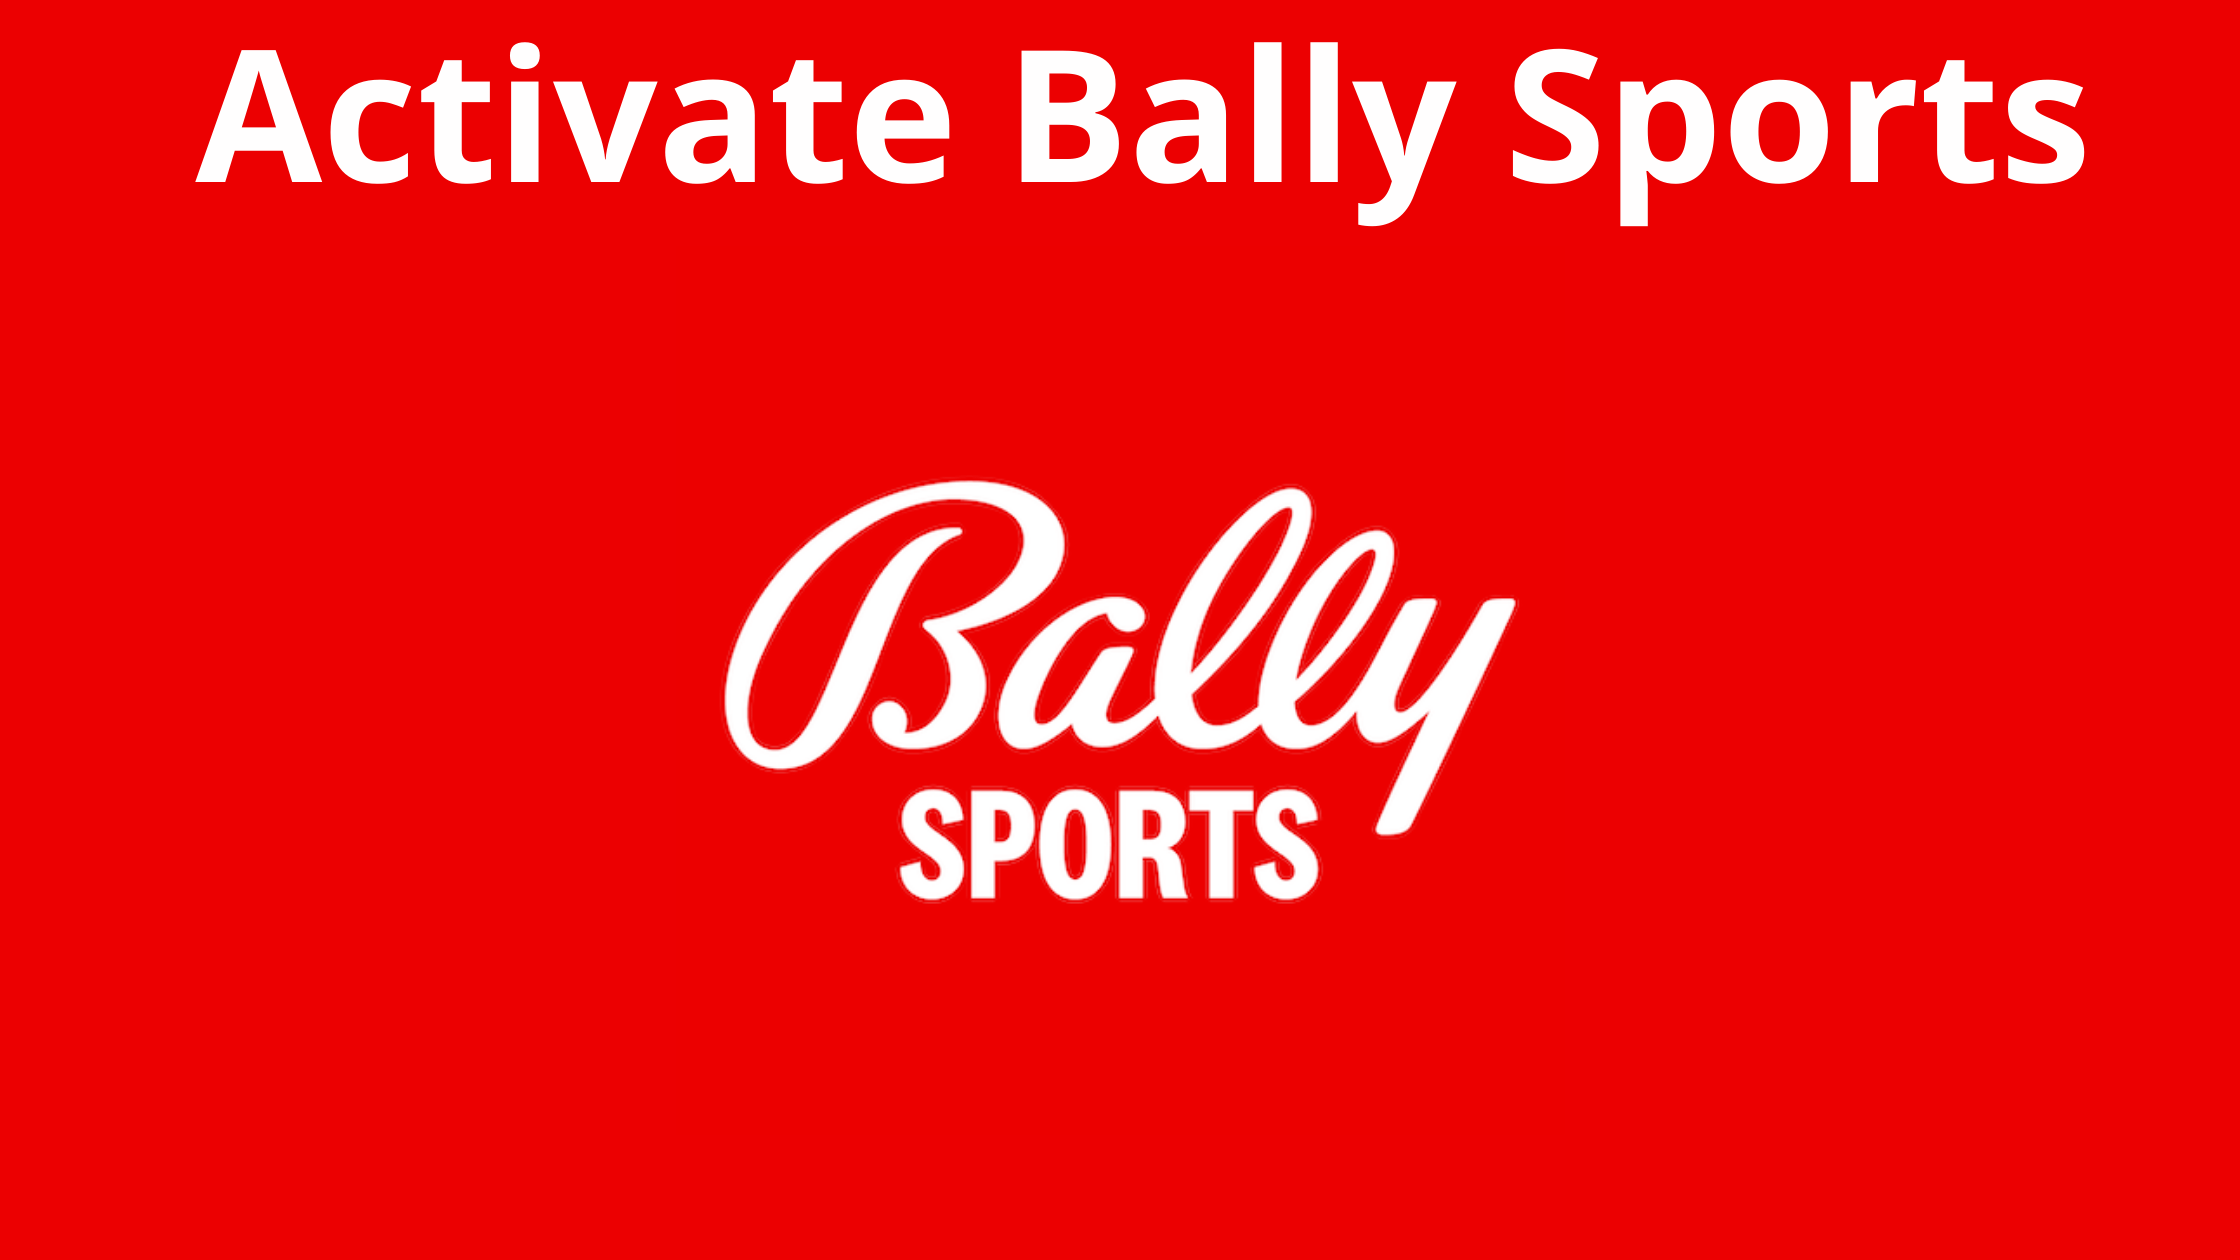 Bally sports Com Activate Process - A Best Fashion